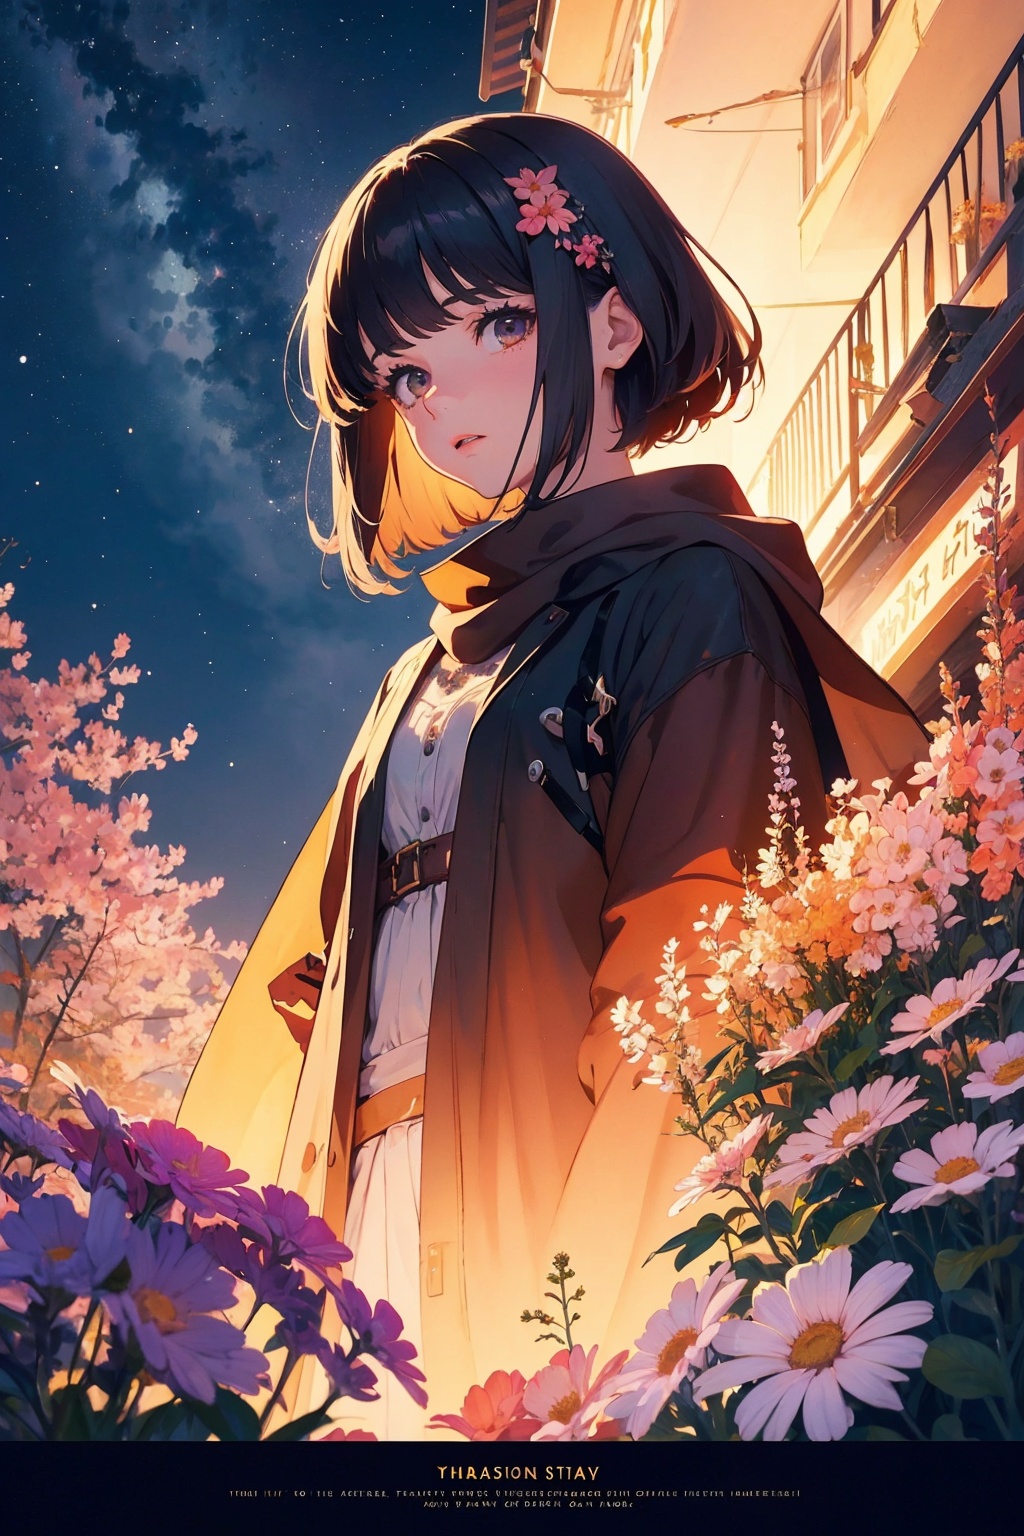 (Best quality), (masterpiece), (detailed details), movie poster, the rendered night sky is full of mystery and magic, as if in the distant space. Bright stars, or dense or sparse, like a pearl inlaid on the sky. The sky is full of flowers, cute and detailed digital art, and anime illustrations,